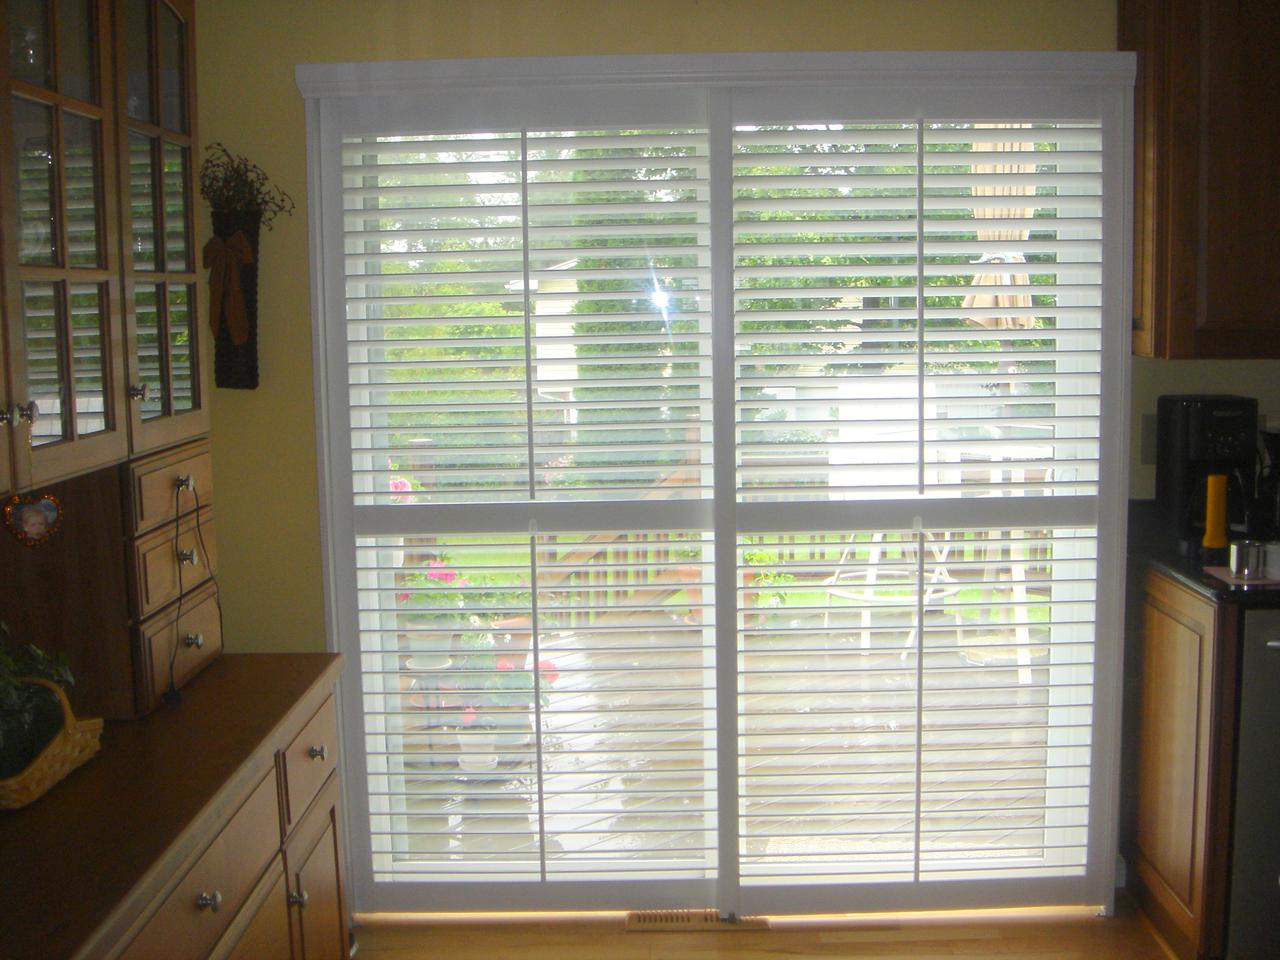 Bypass shutters closed with louvers opened on a sliding glass door in a kitchen